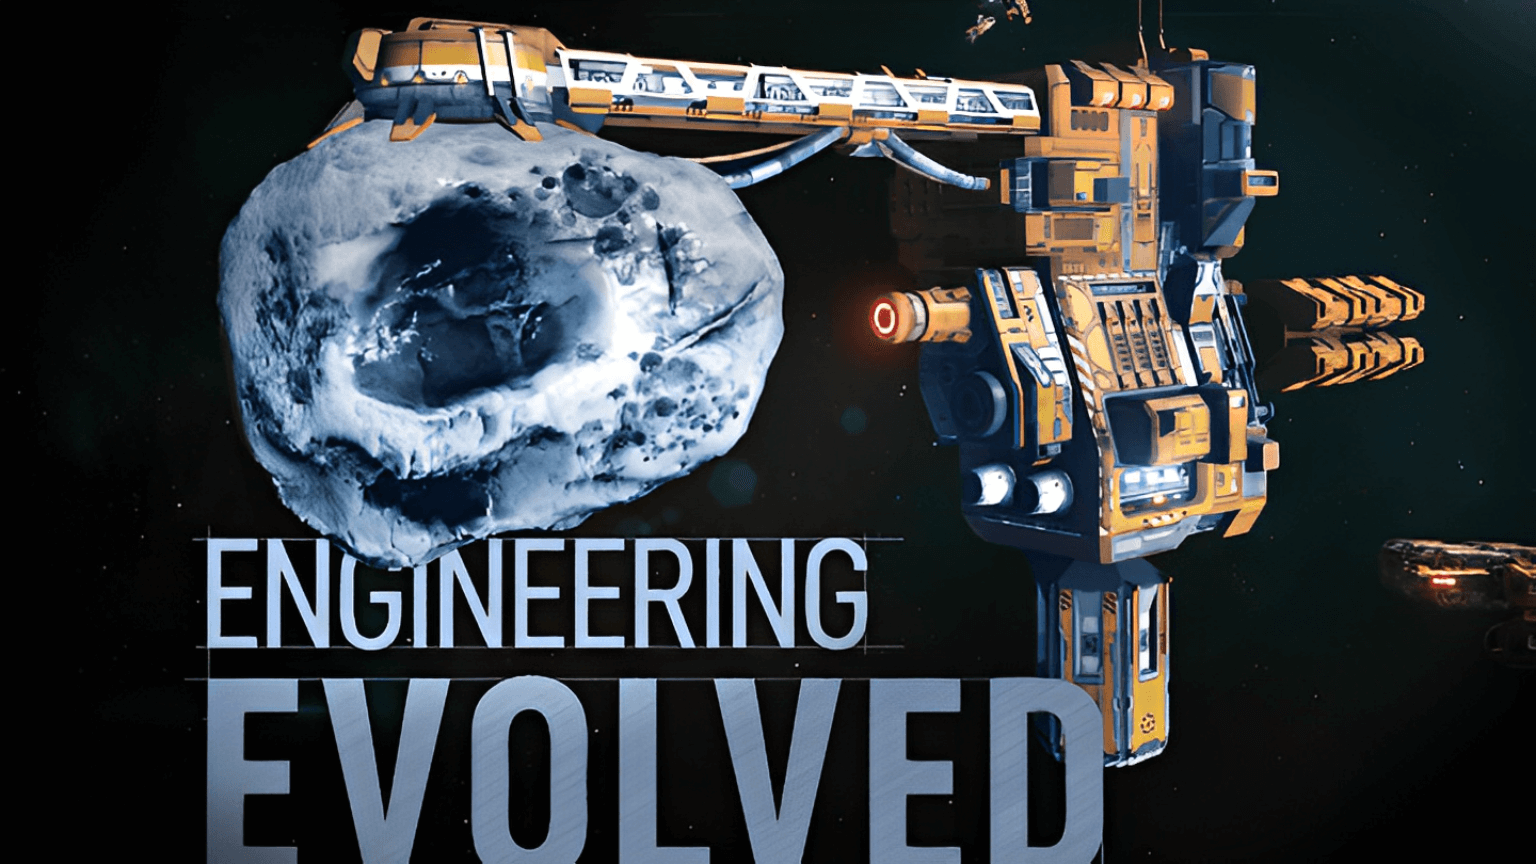 Engineering Evolved TV series features expertise of McMaster professors